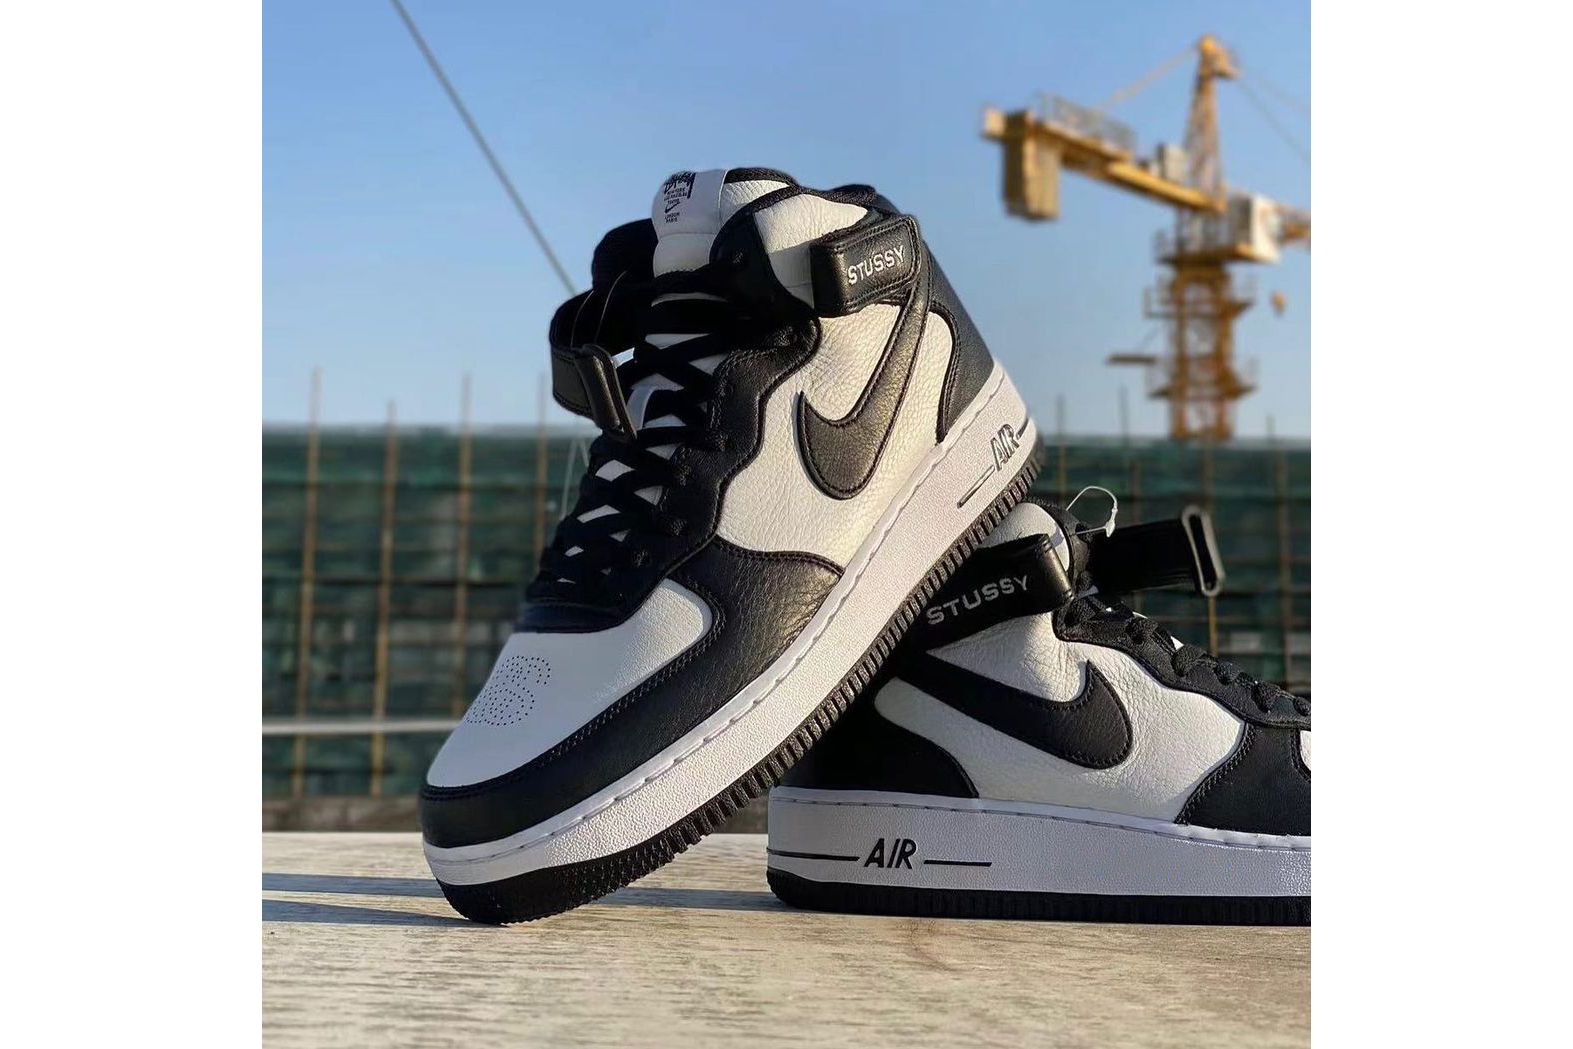 virgil abloh has another nike dunk on the way - Sb-roscoffShops